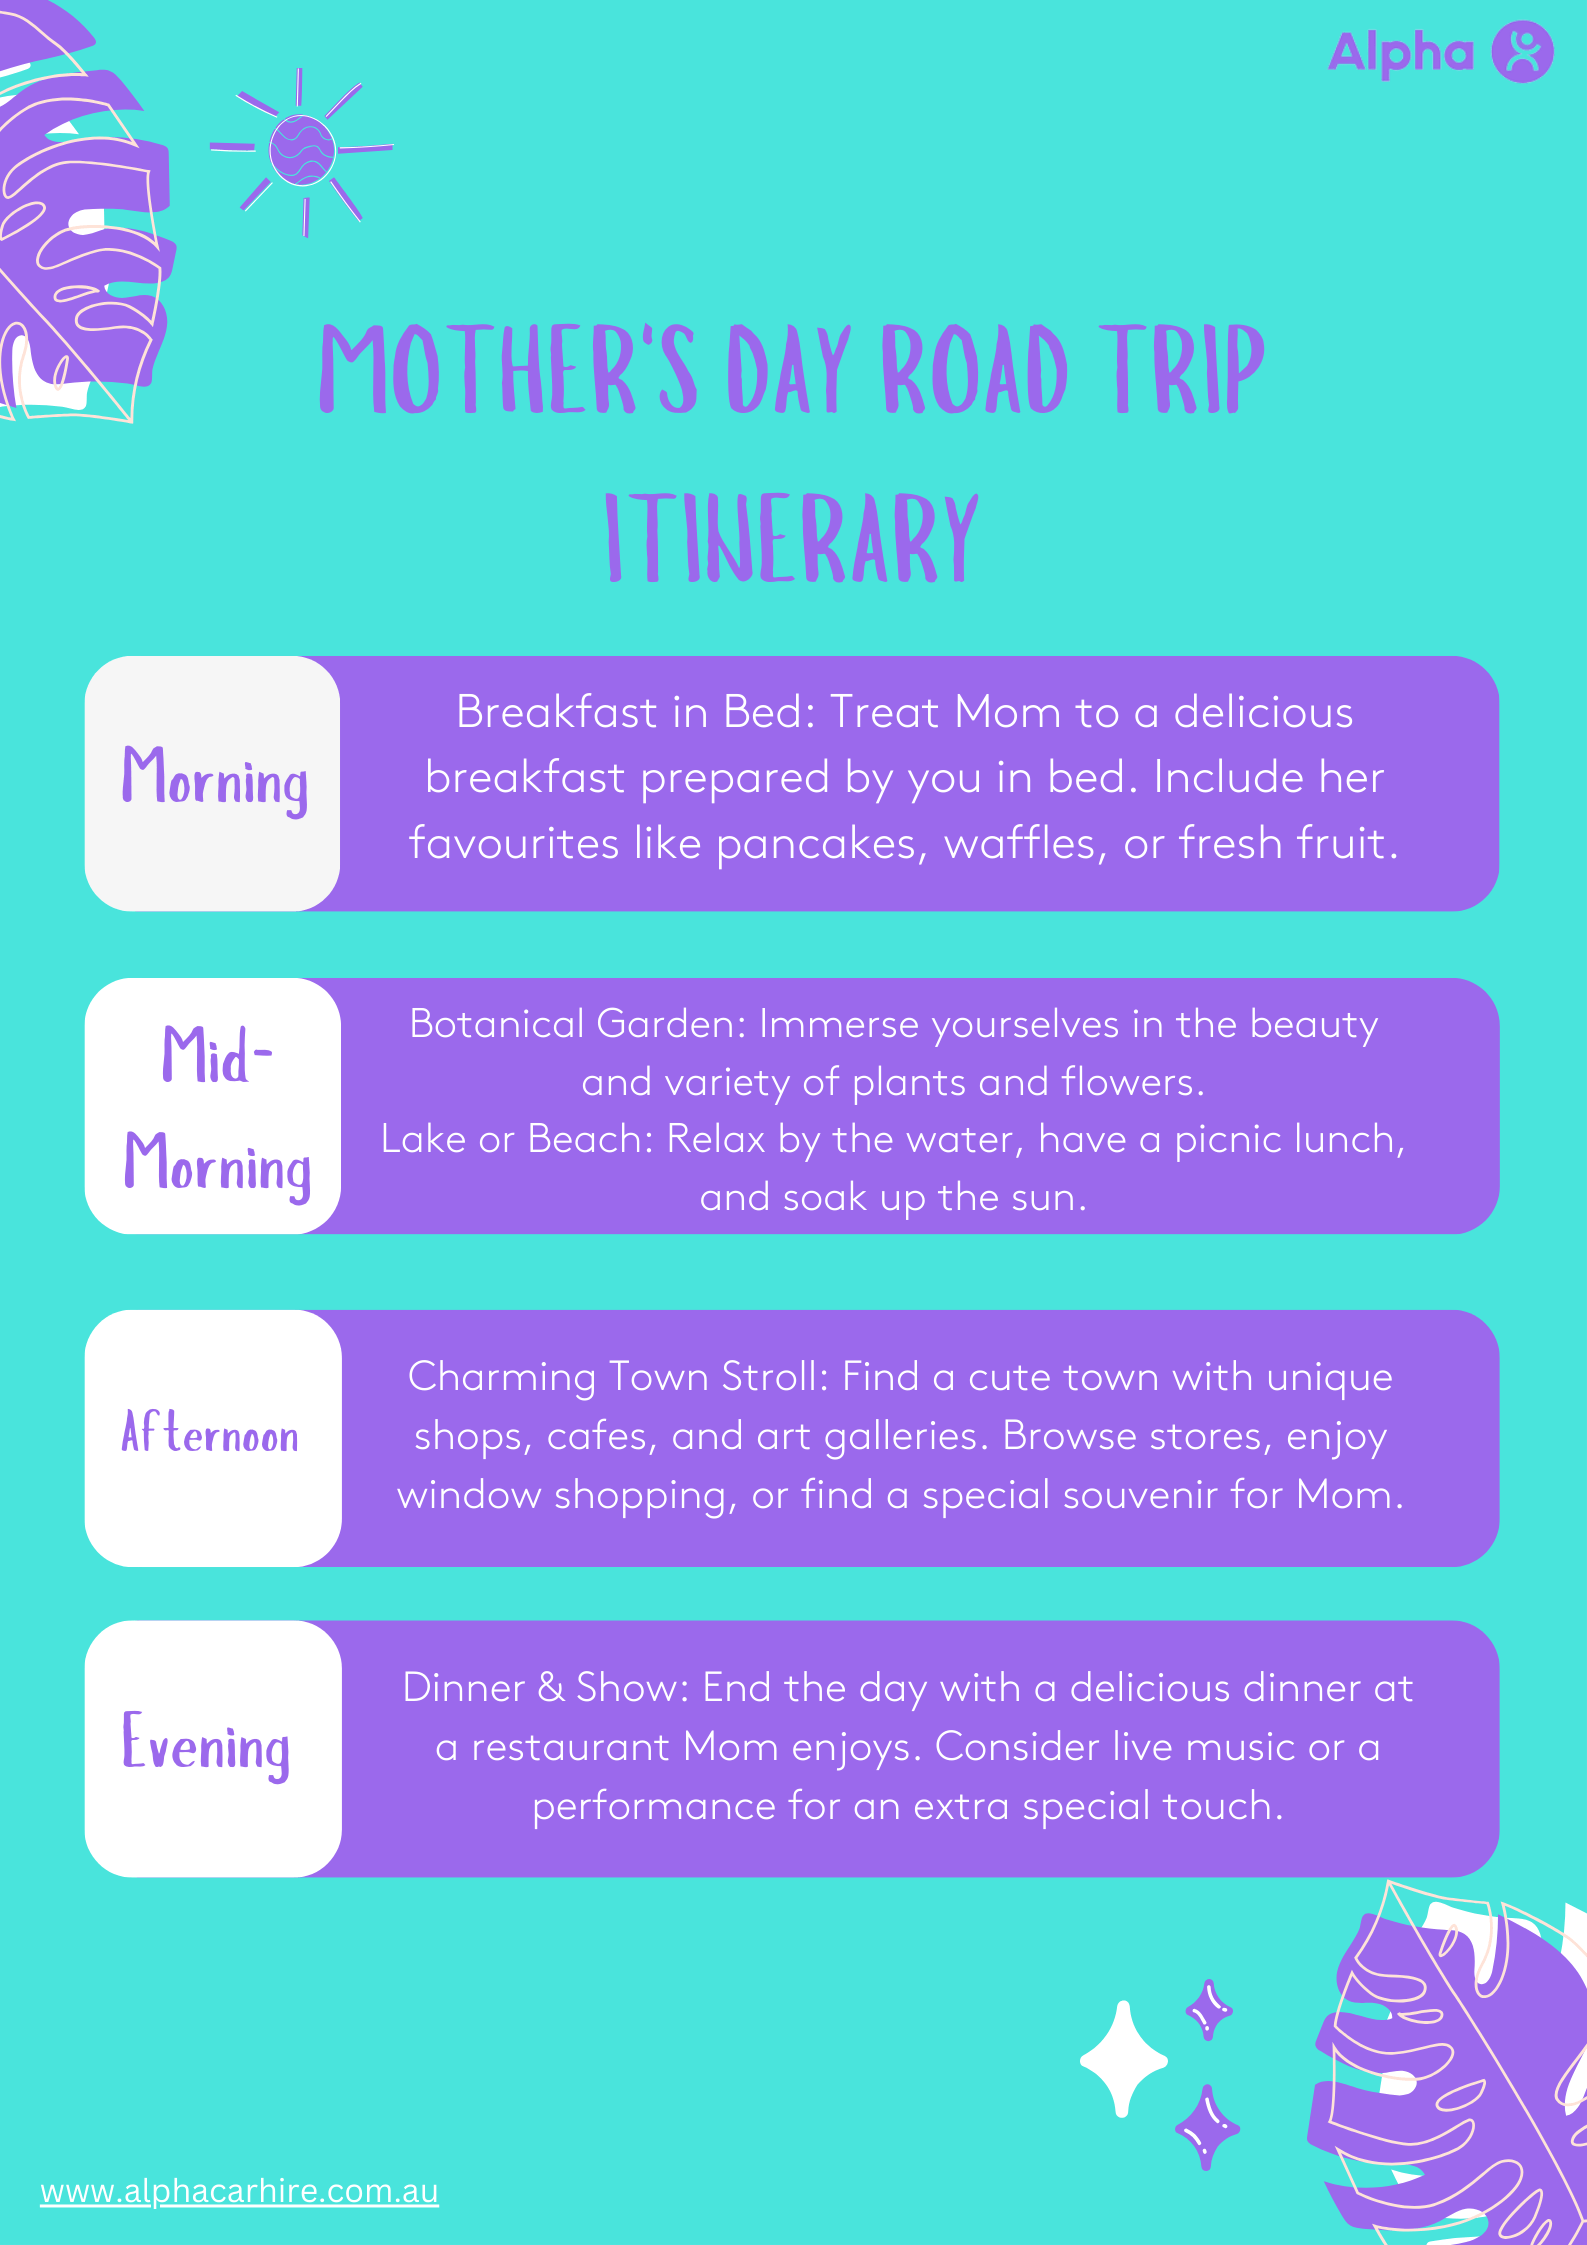 mothers-day-road-trip-itinerary-infographic (1)